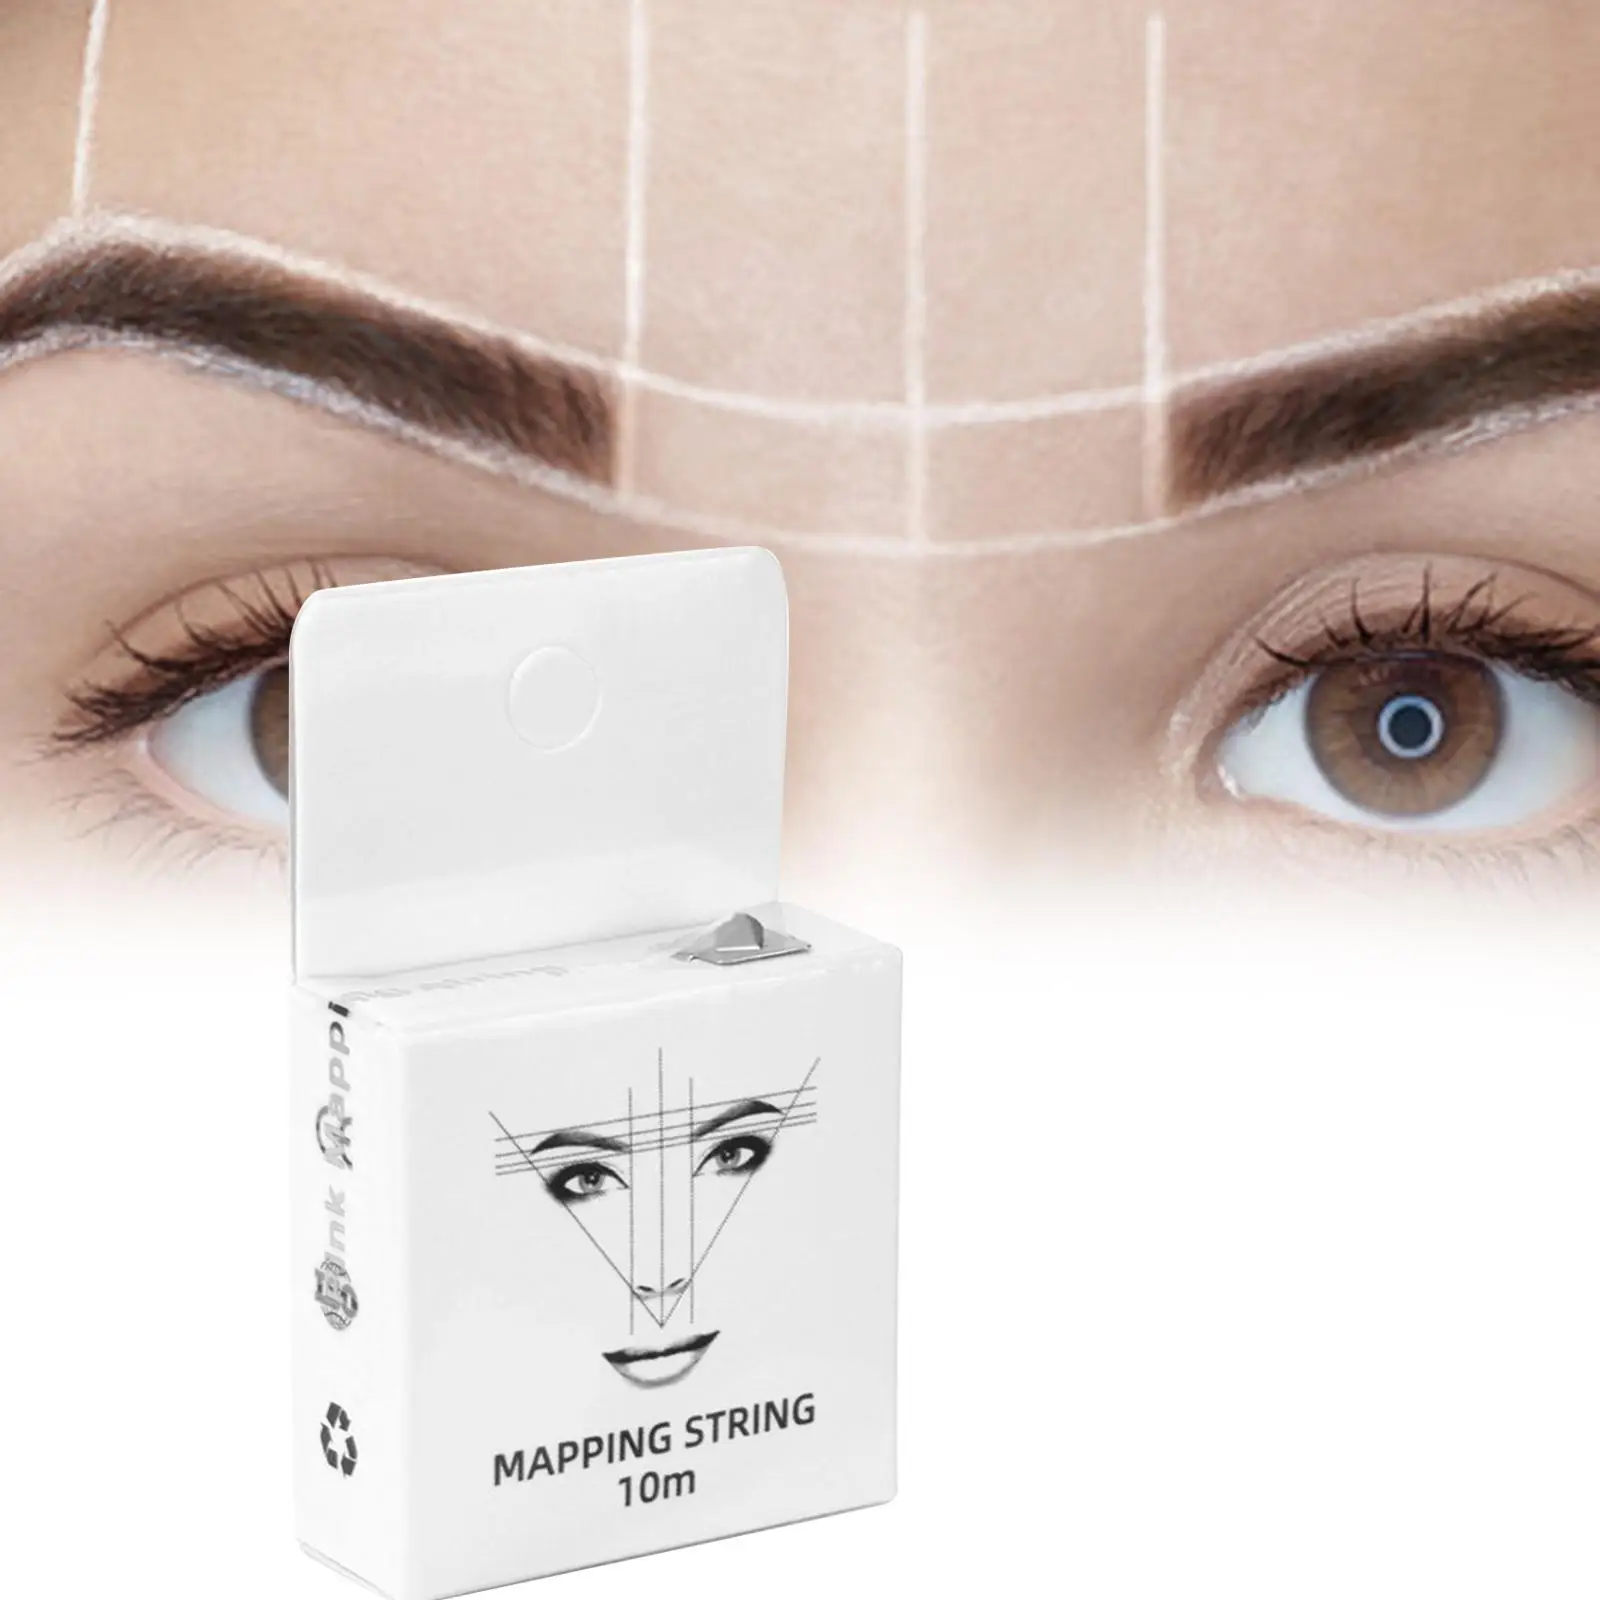 White Eyebrow Mapping String Positioning Mapping Line Drawing with Ink Eyebrow Thread Ruler